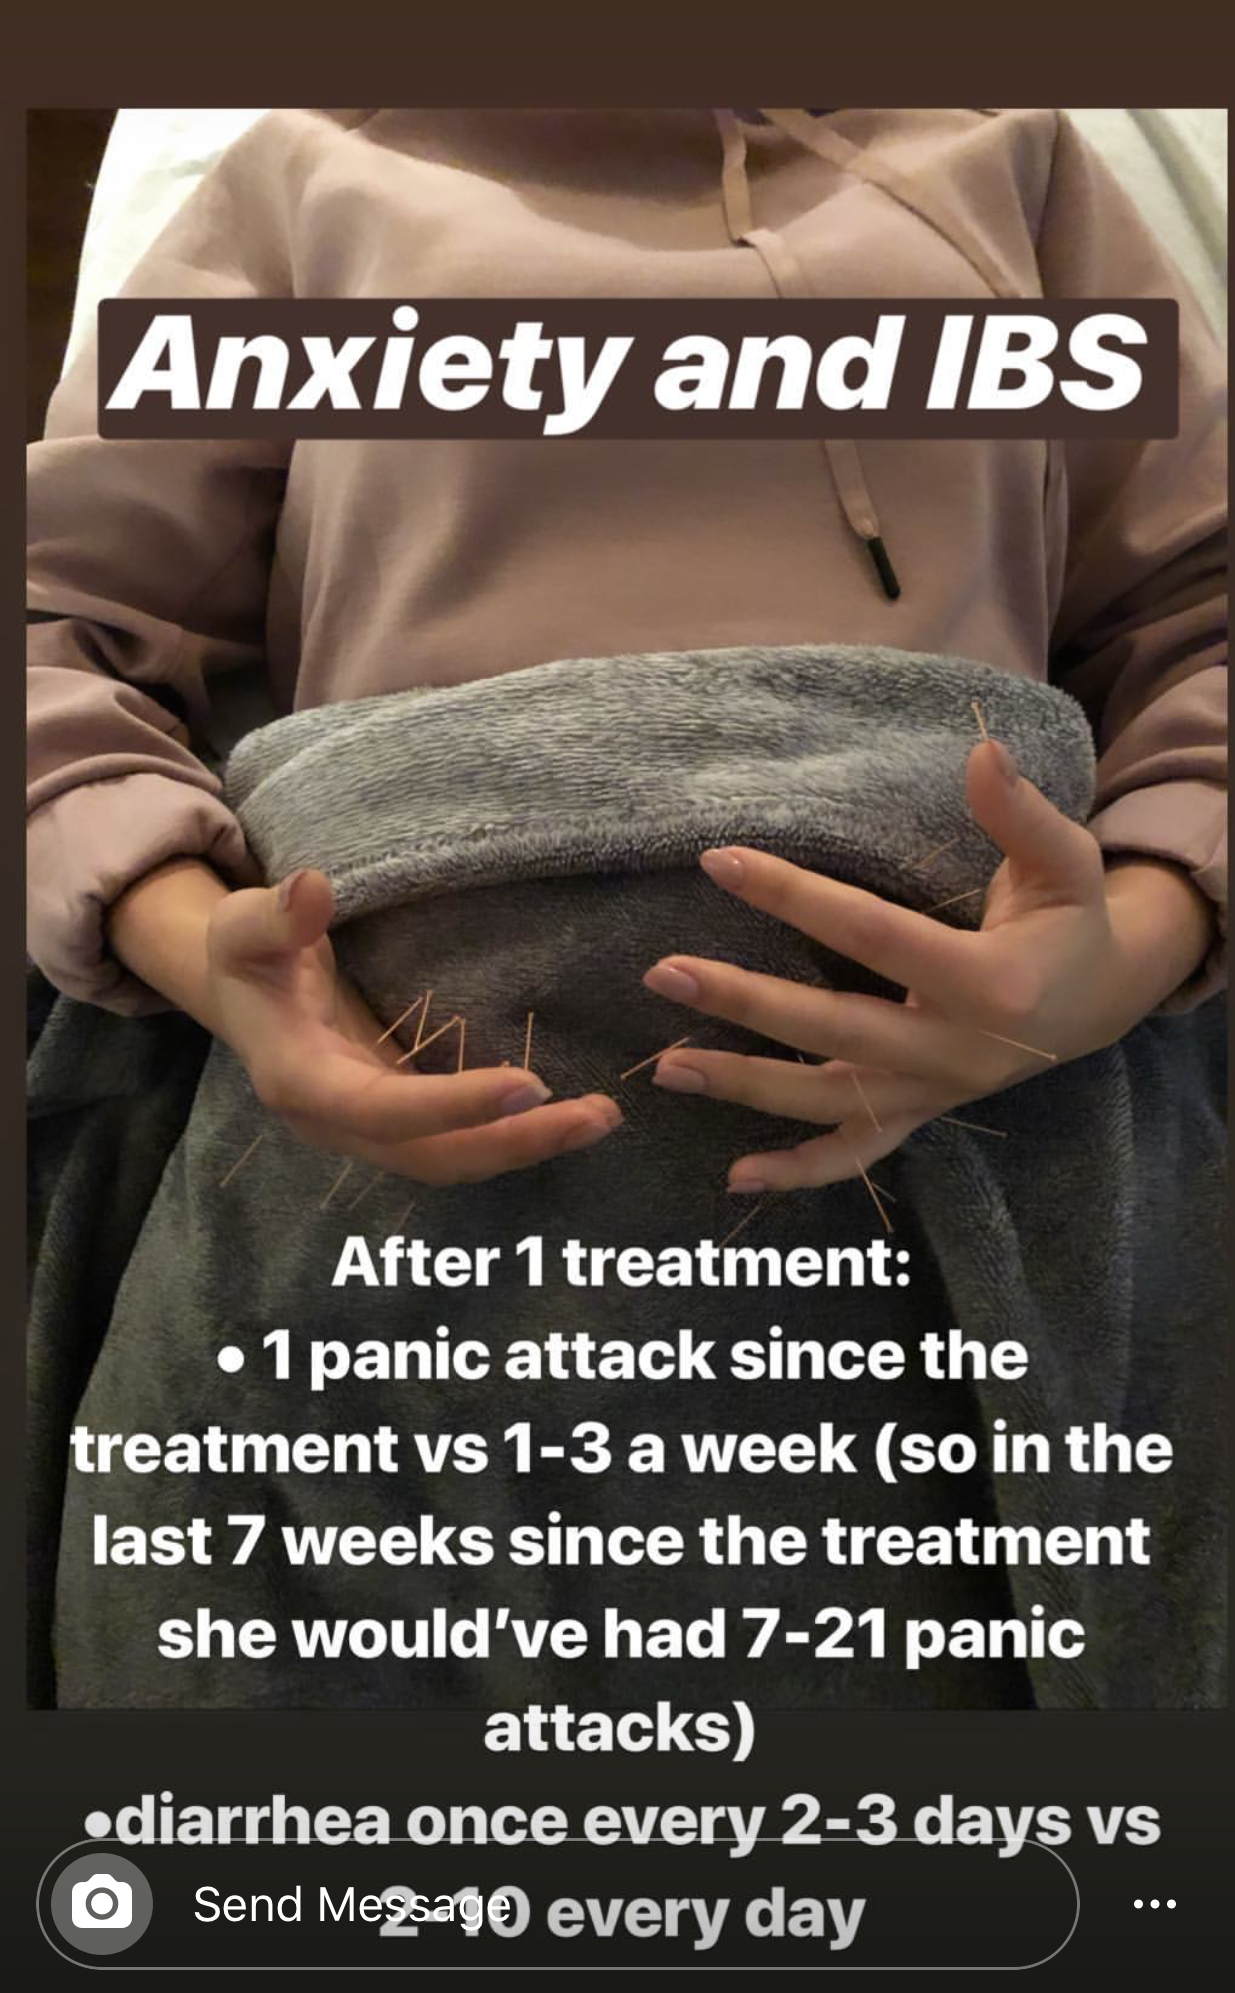  SuJok acupuncture treatment used as an alternative to digestive conditions like IBS triggered by anxiety. Treatment resulted in decrease in panic attacks and reducing diarrhea  